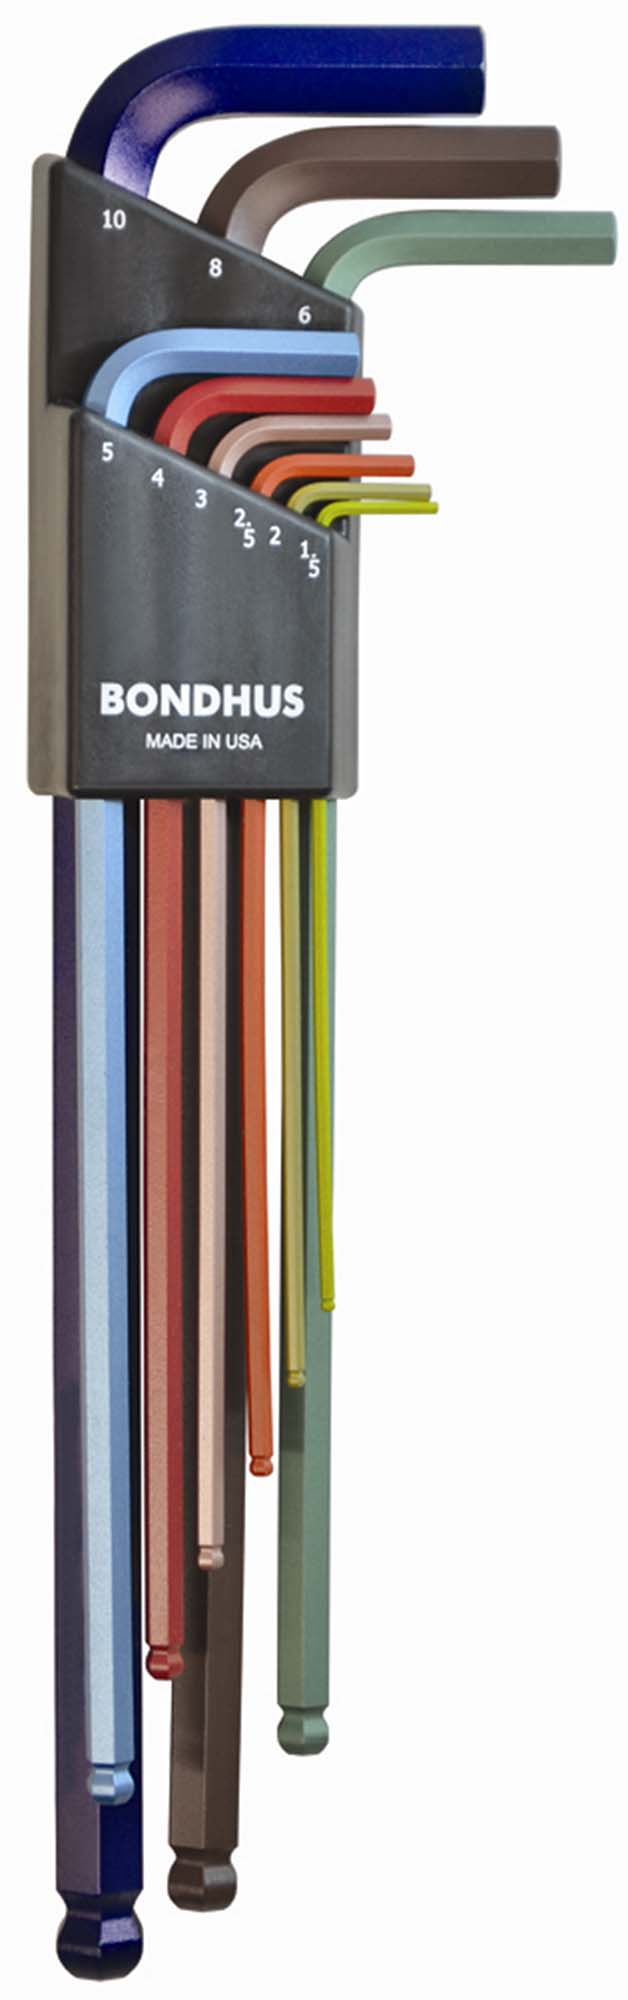 Bondhus 69699 1.5-10mm ColorGuard L-Wrench Ball End Metric Hex Hey Set, Set of 9 - Extra Long